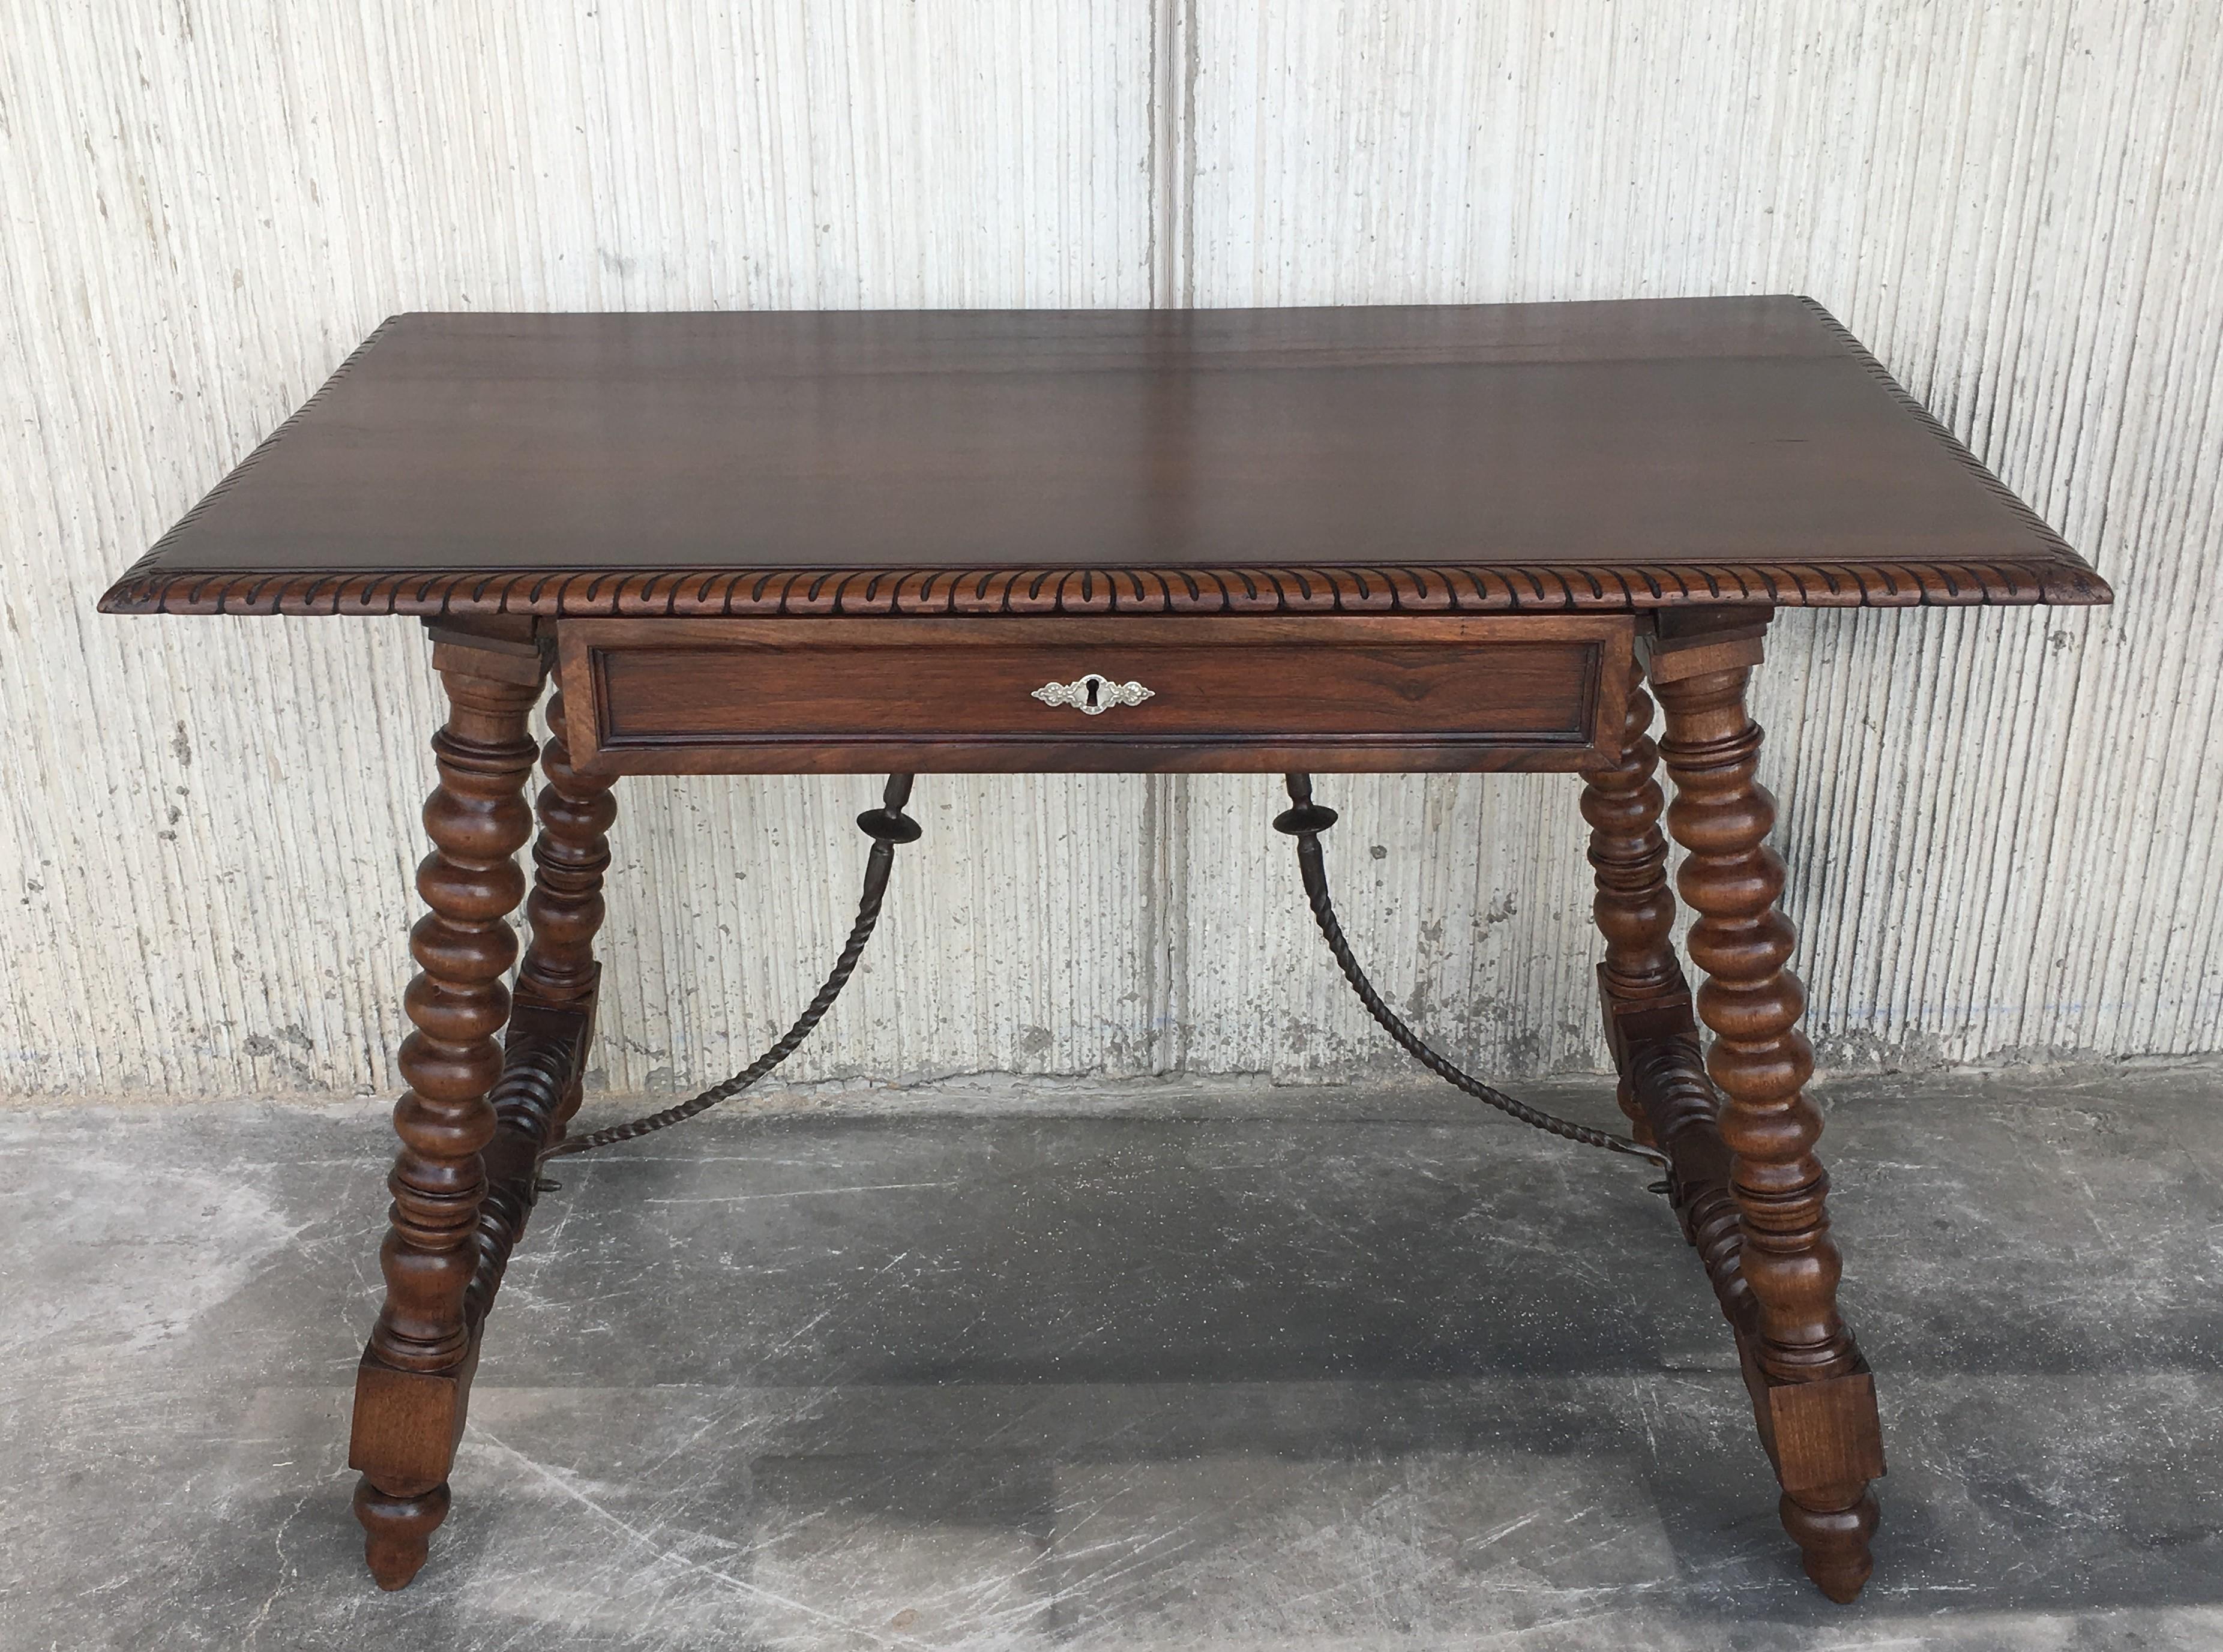 Baroque 18th Spanish Revival Refectory Desk Table with One Drawer